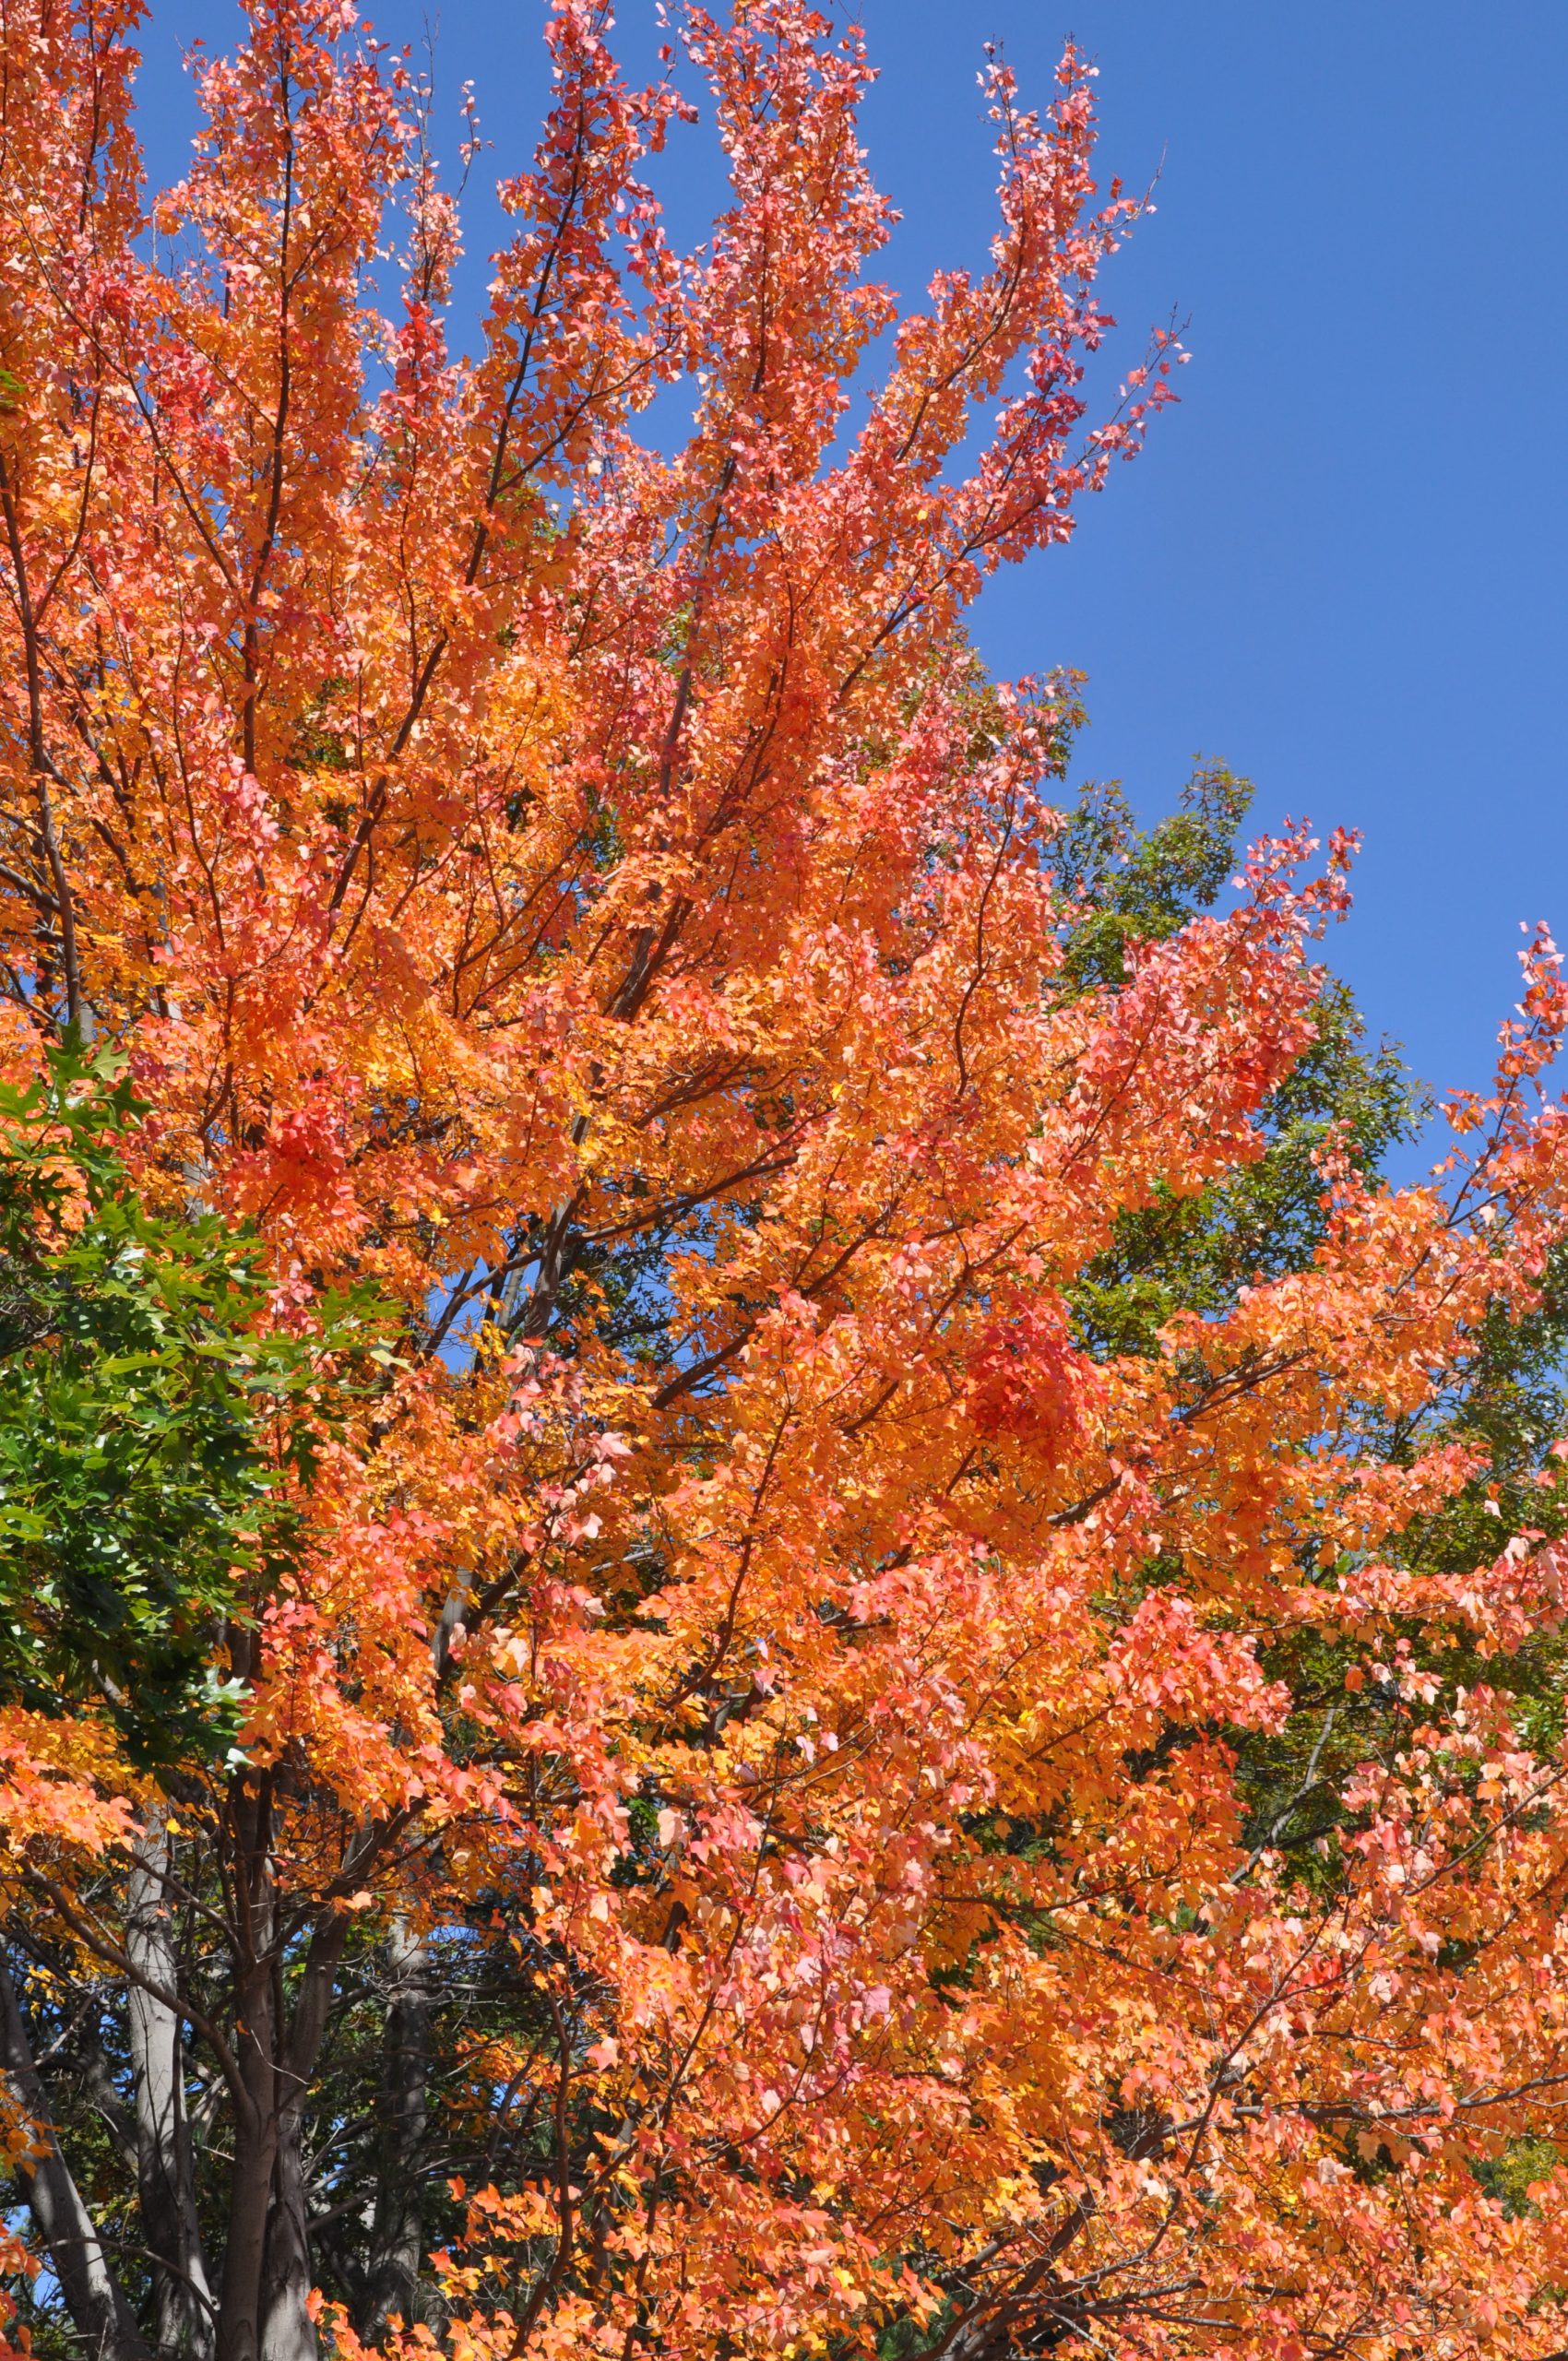 Trees With Orange Leaves (user submitted)